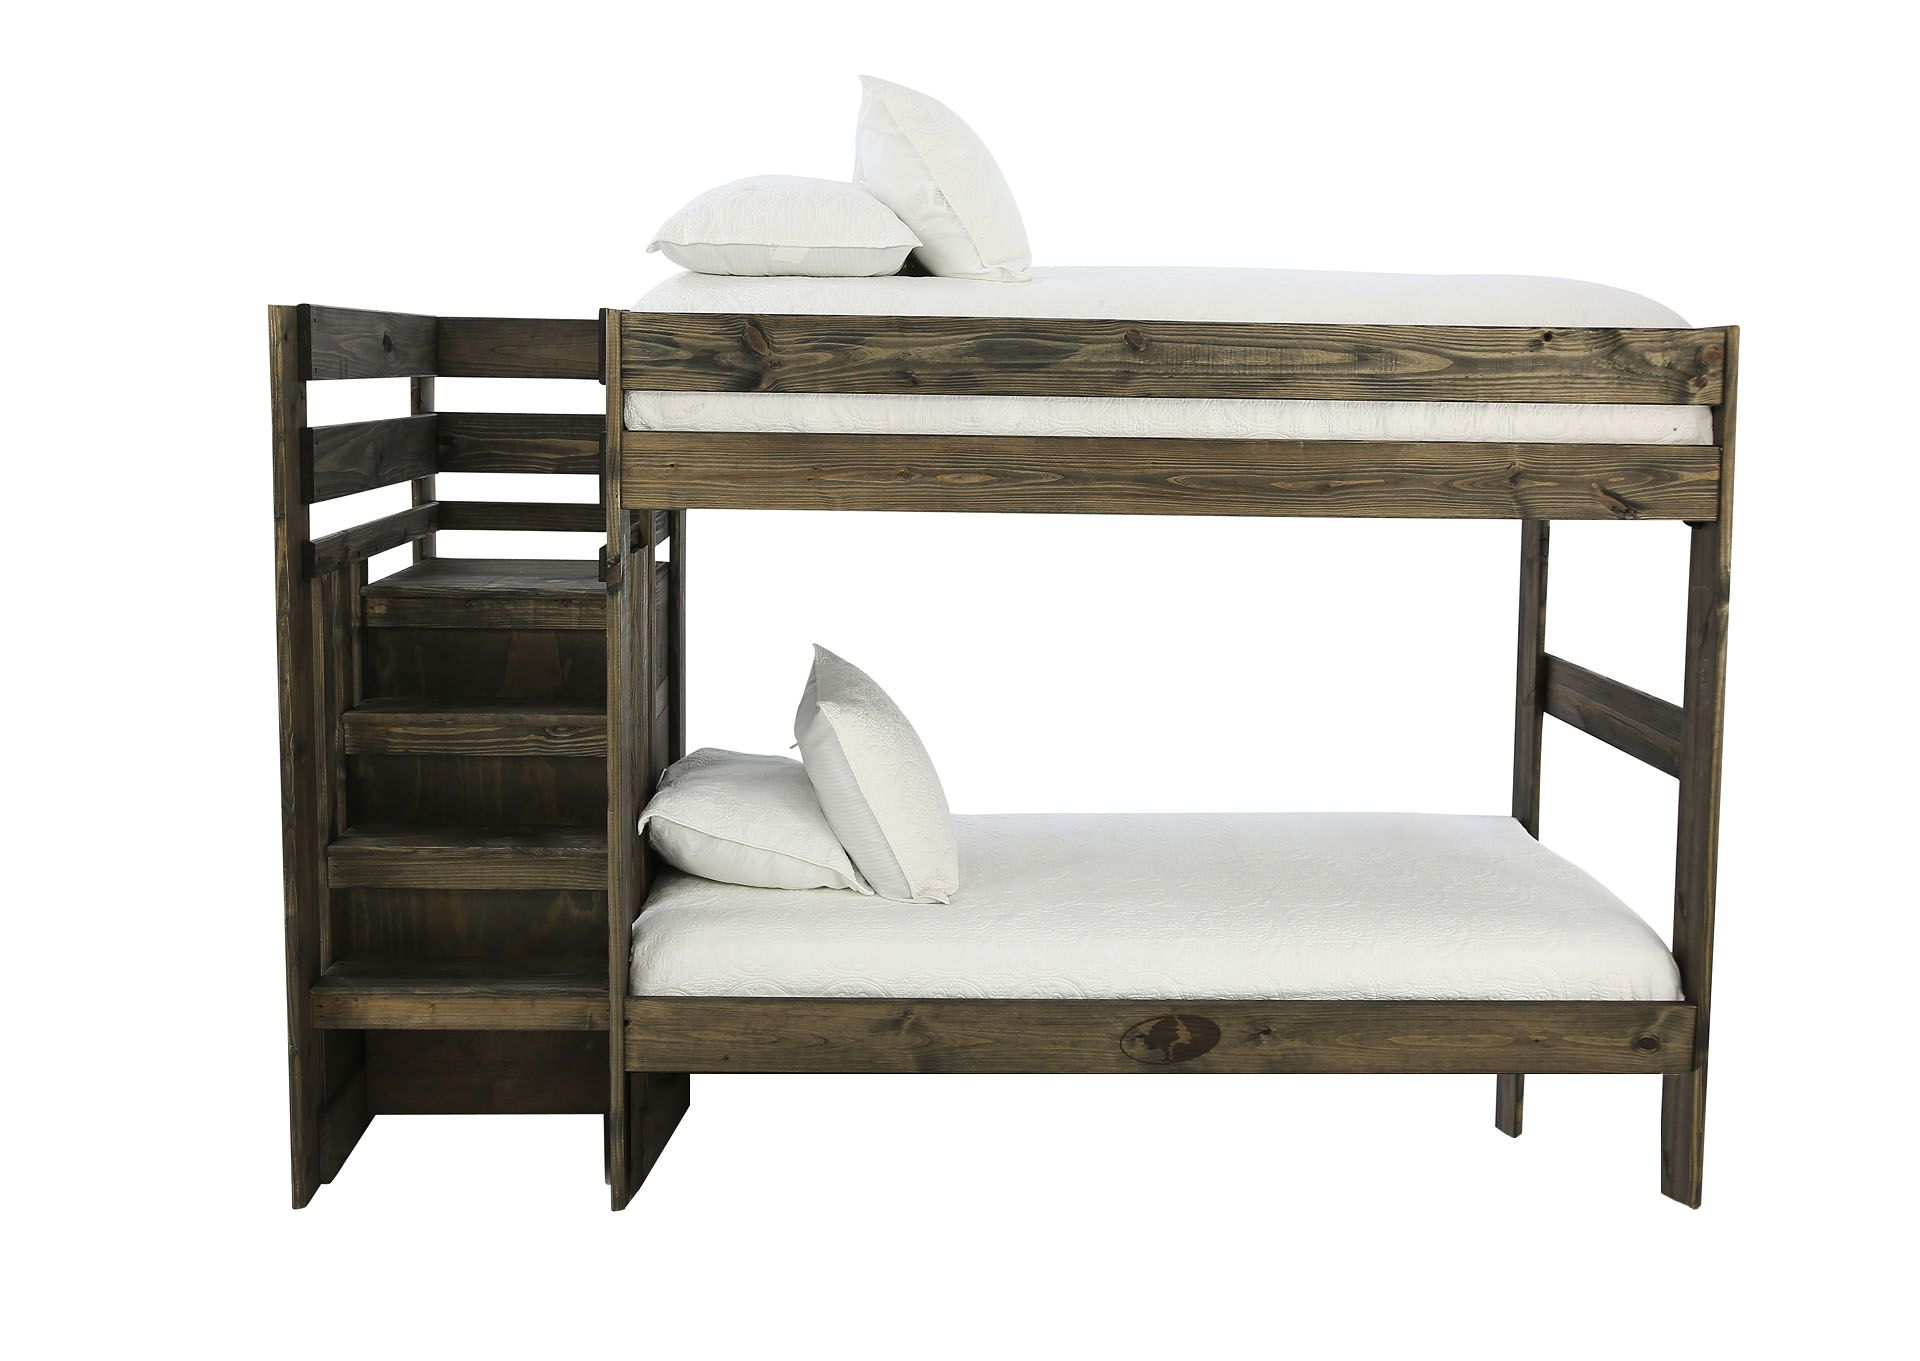 Silas Mossy Oak Twin Stair Bunkbed, Cantilever Bunk Beds